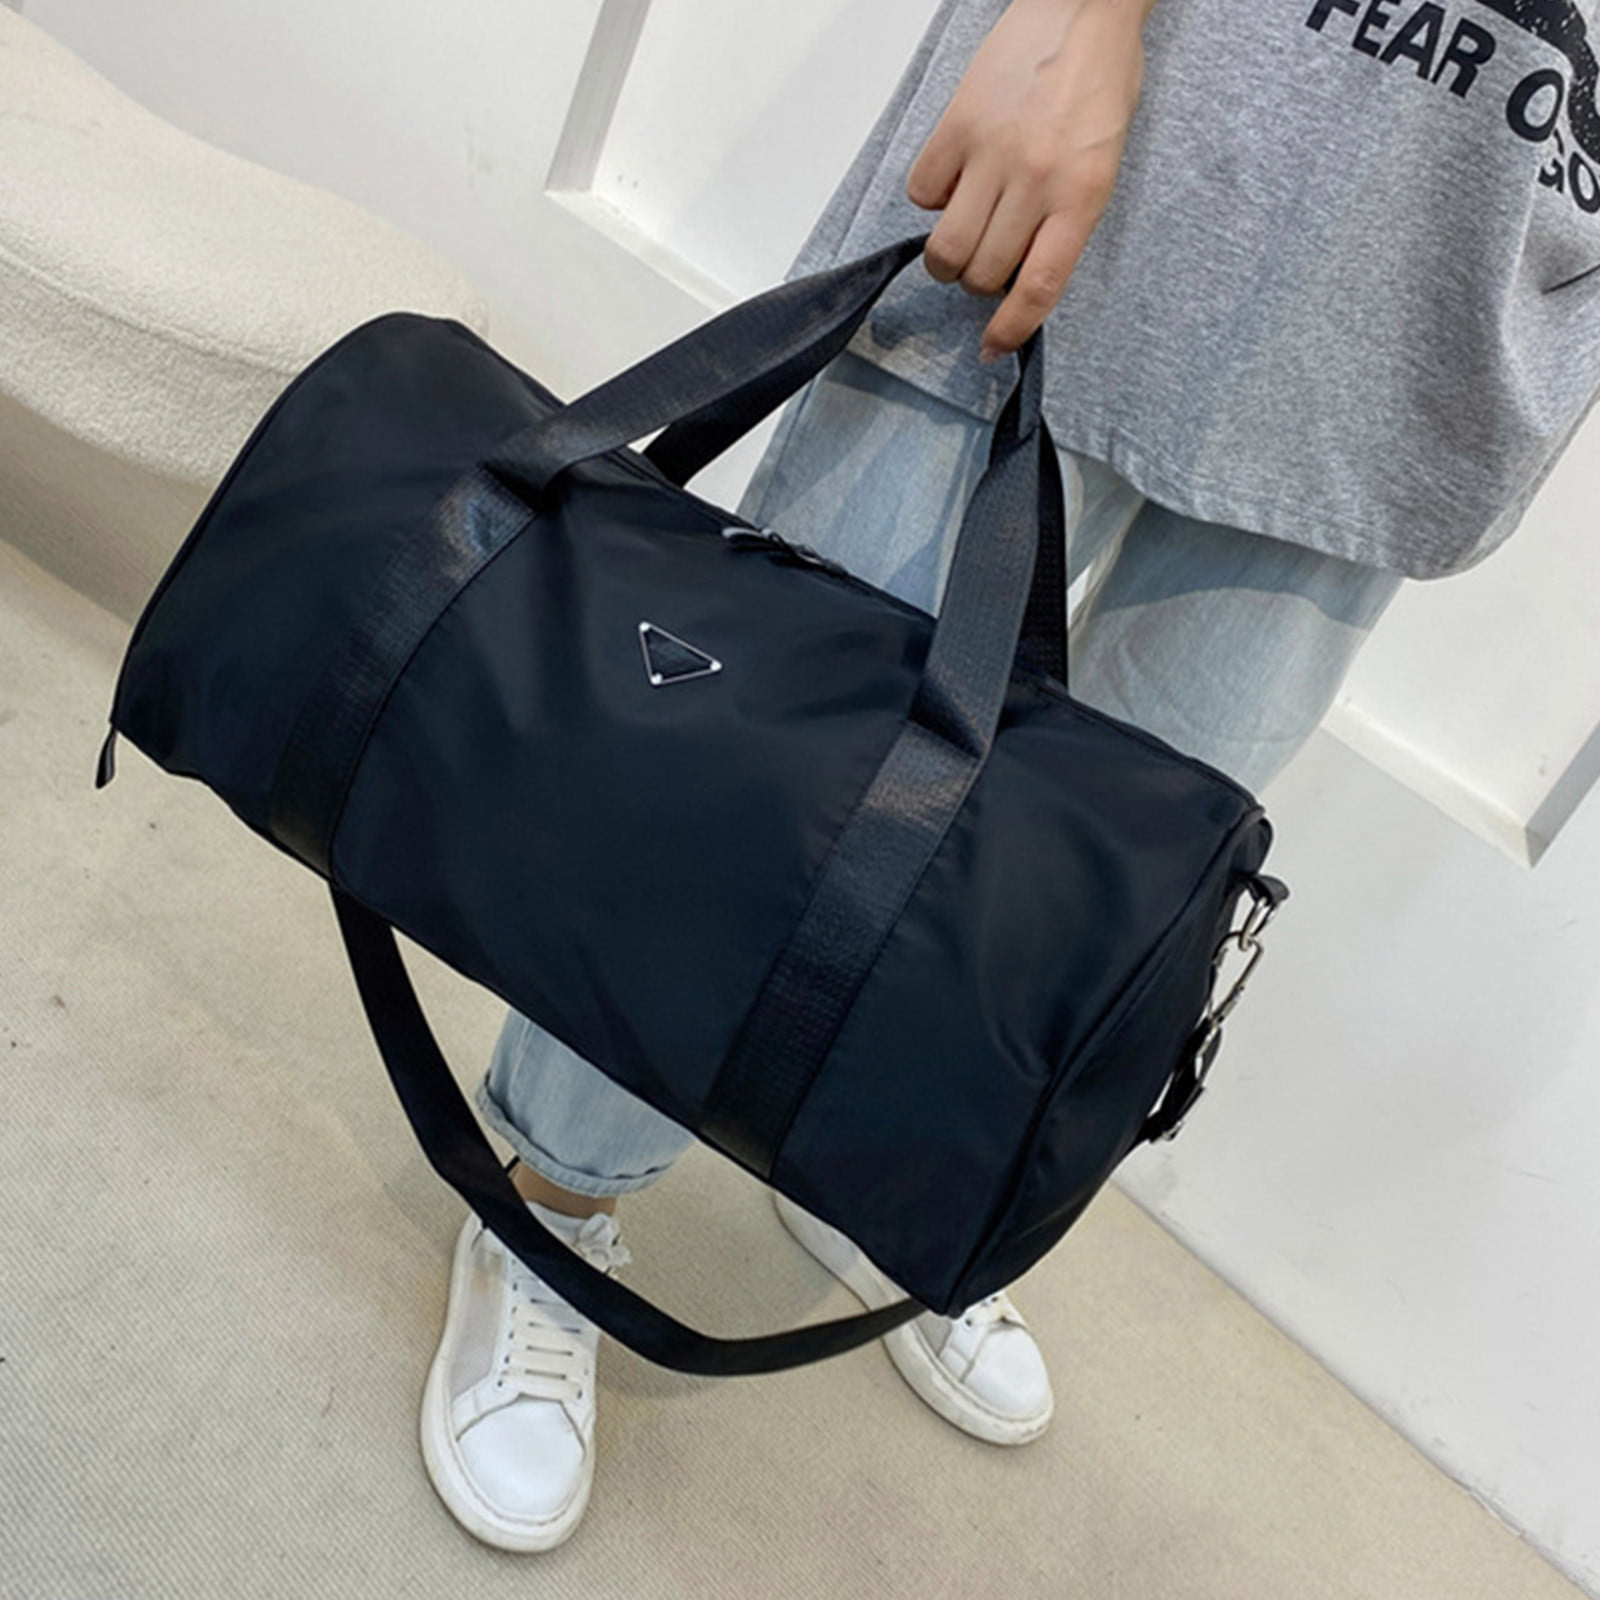 Gym Bag for Women and Men Small Duffel Bag for Sports and Weekend Getaway  Waterproof Dufflebag with Wet Clothes Compartment - China Weekend Bag and Travel  Bag price